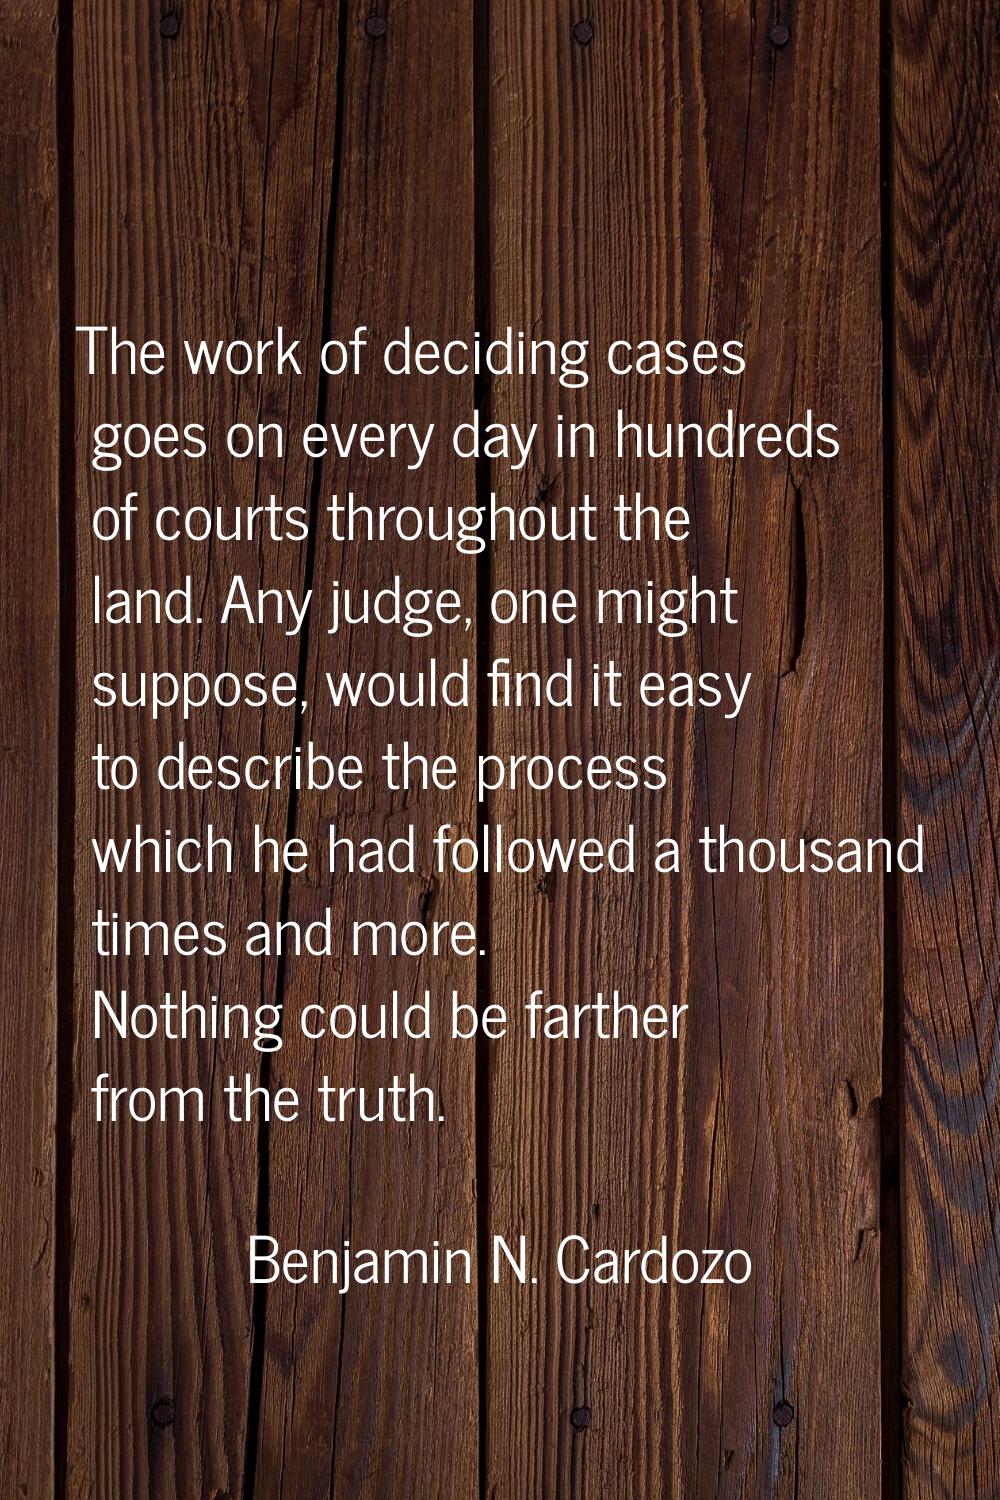 The work of deciding cases goes on every day in hundreds of courts throughout the land. Any judge, 